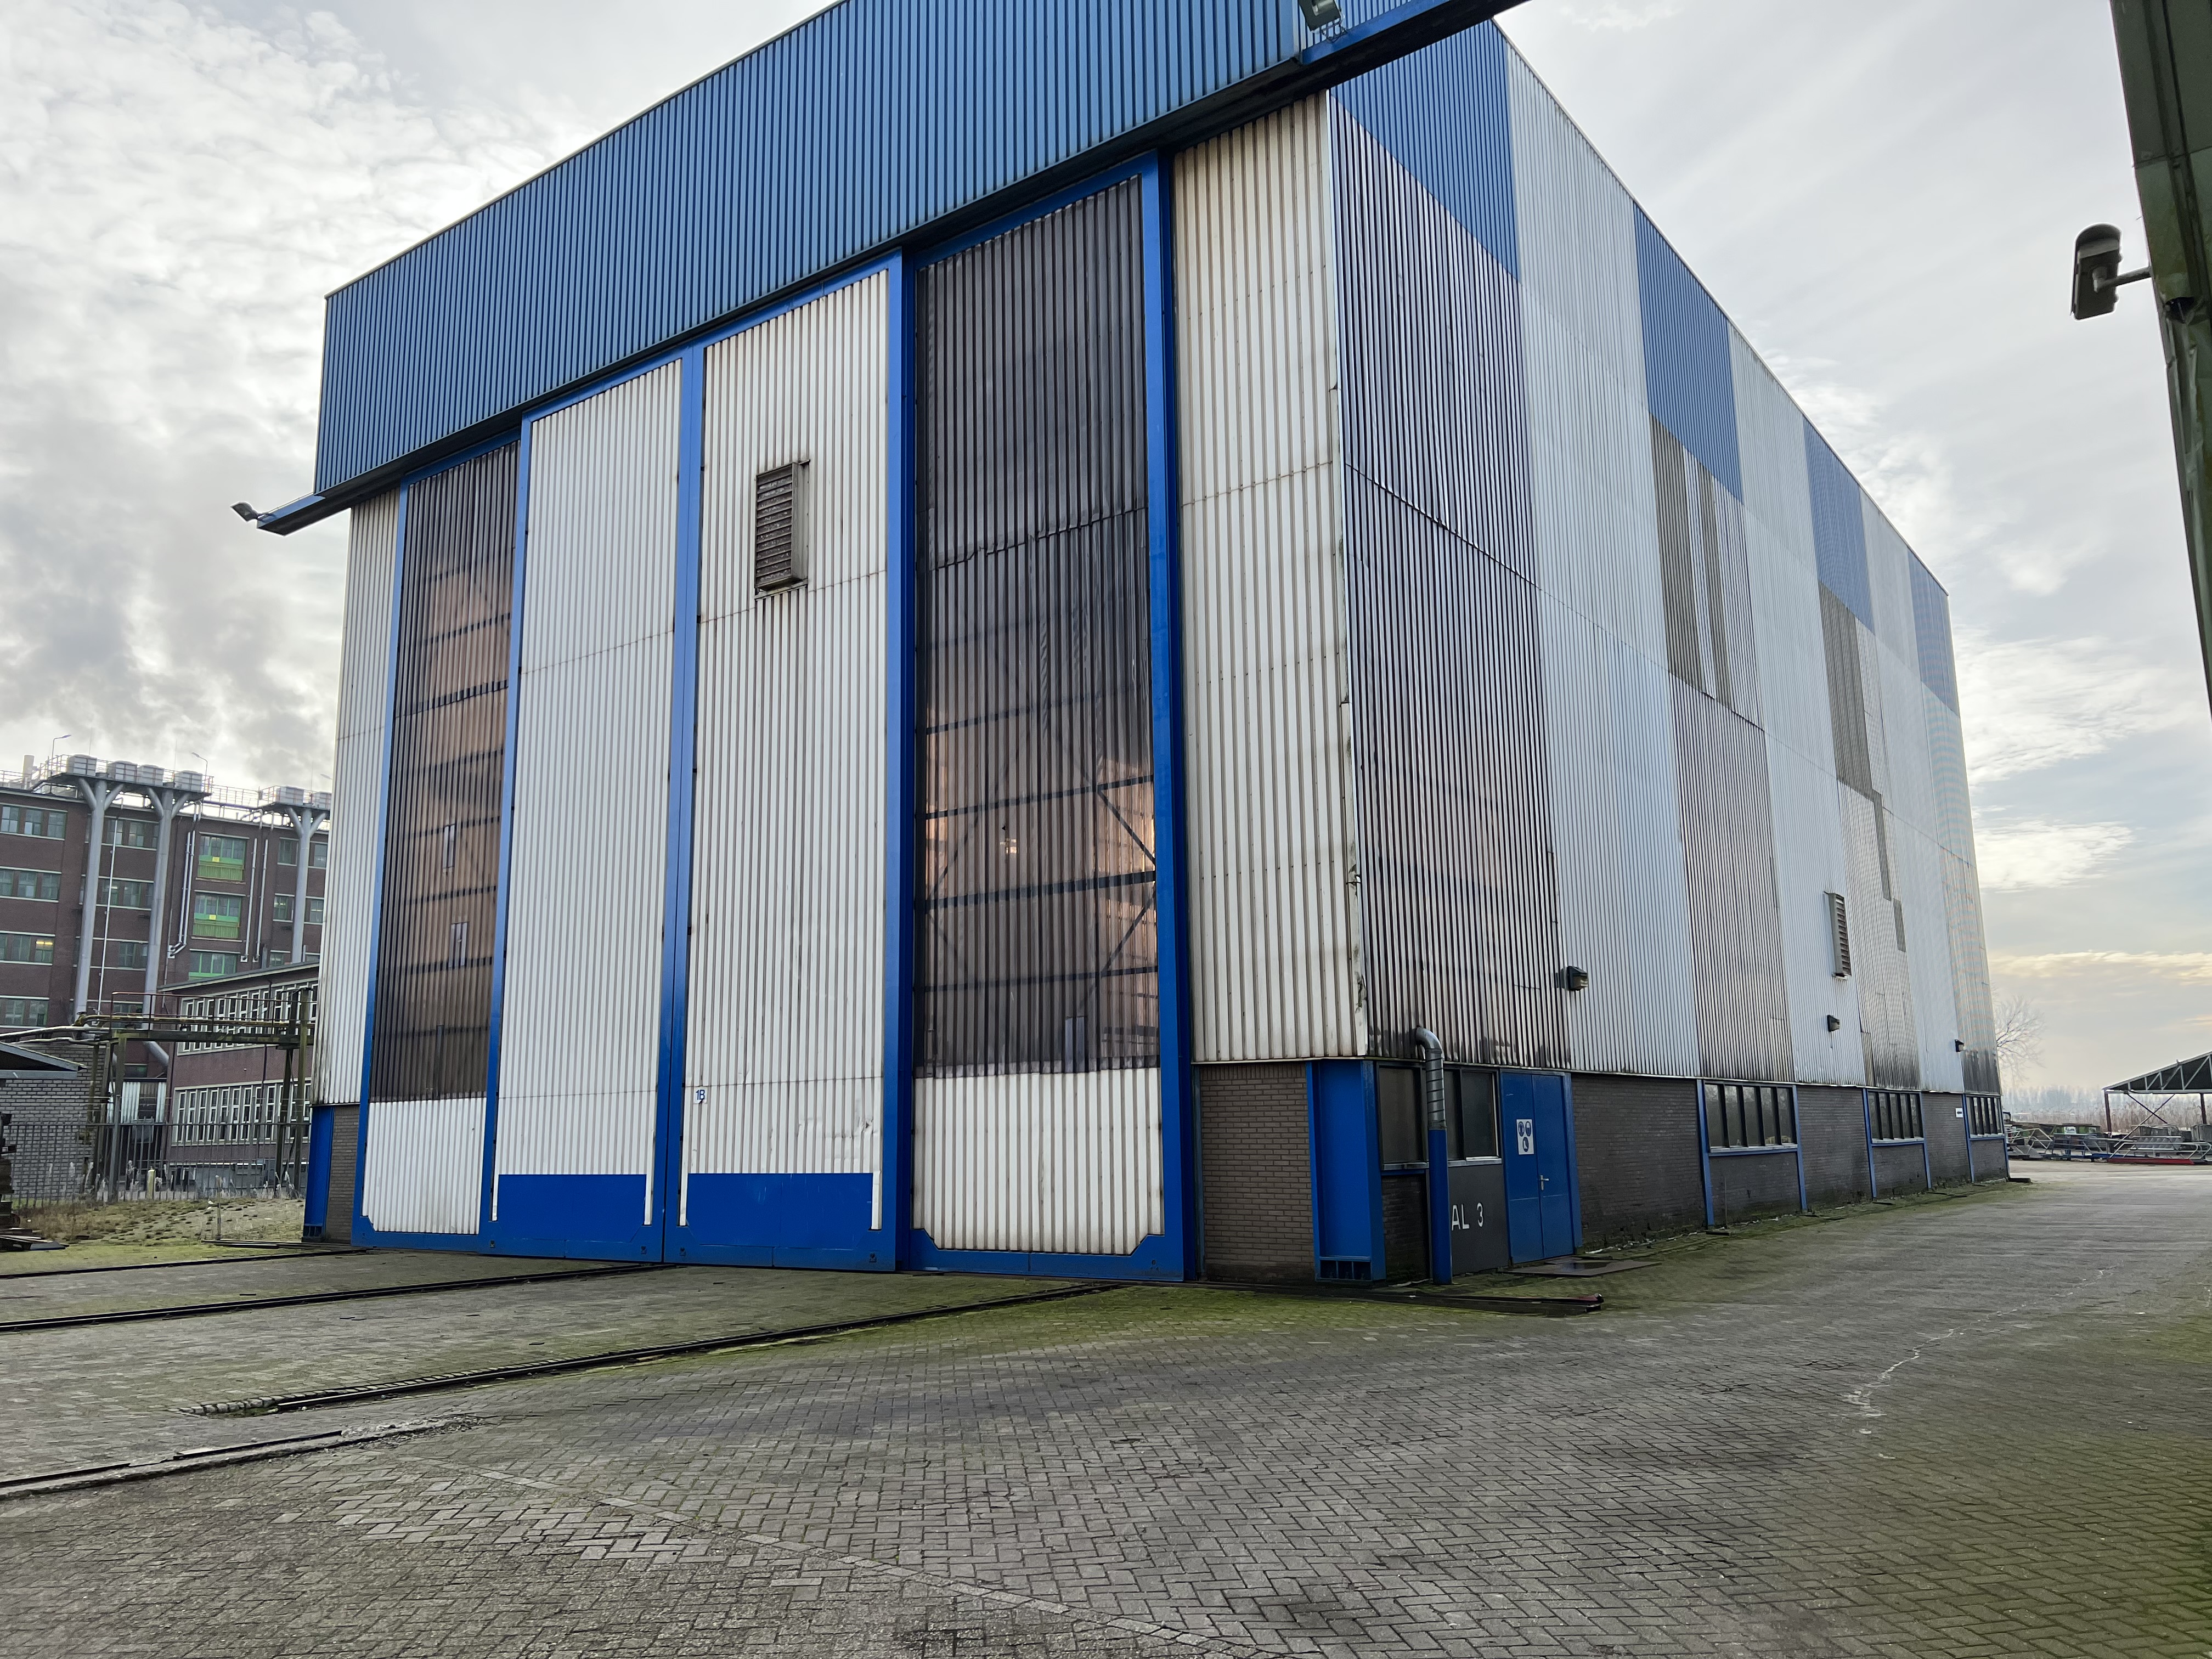 PASSER SIDC together with a partner have acquired a shipyard in the Netherlands